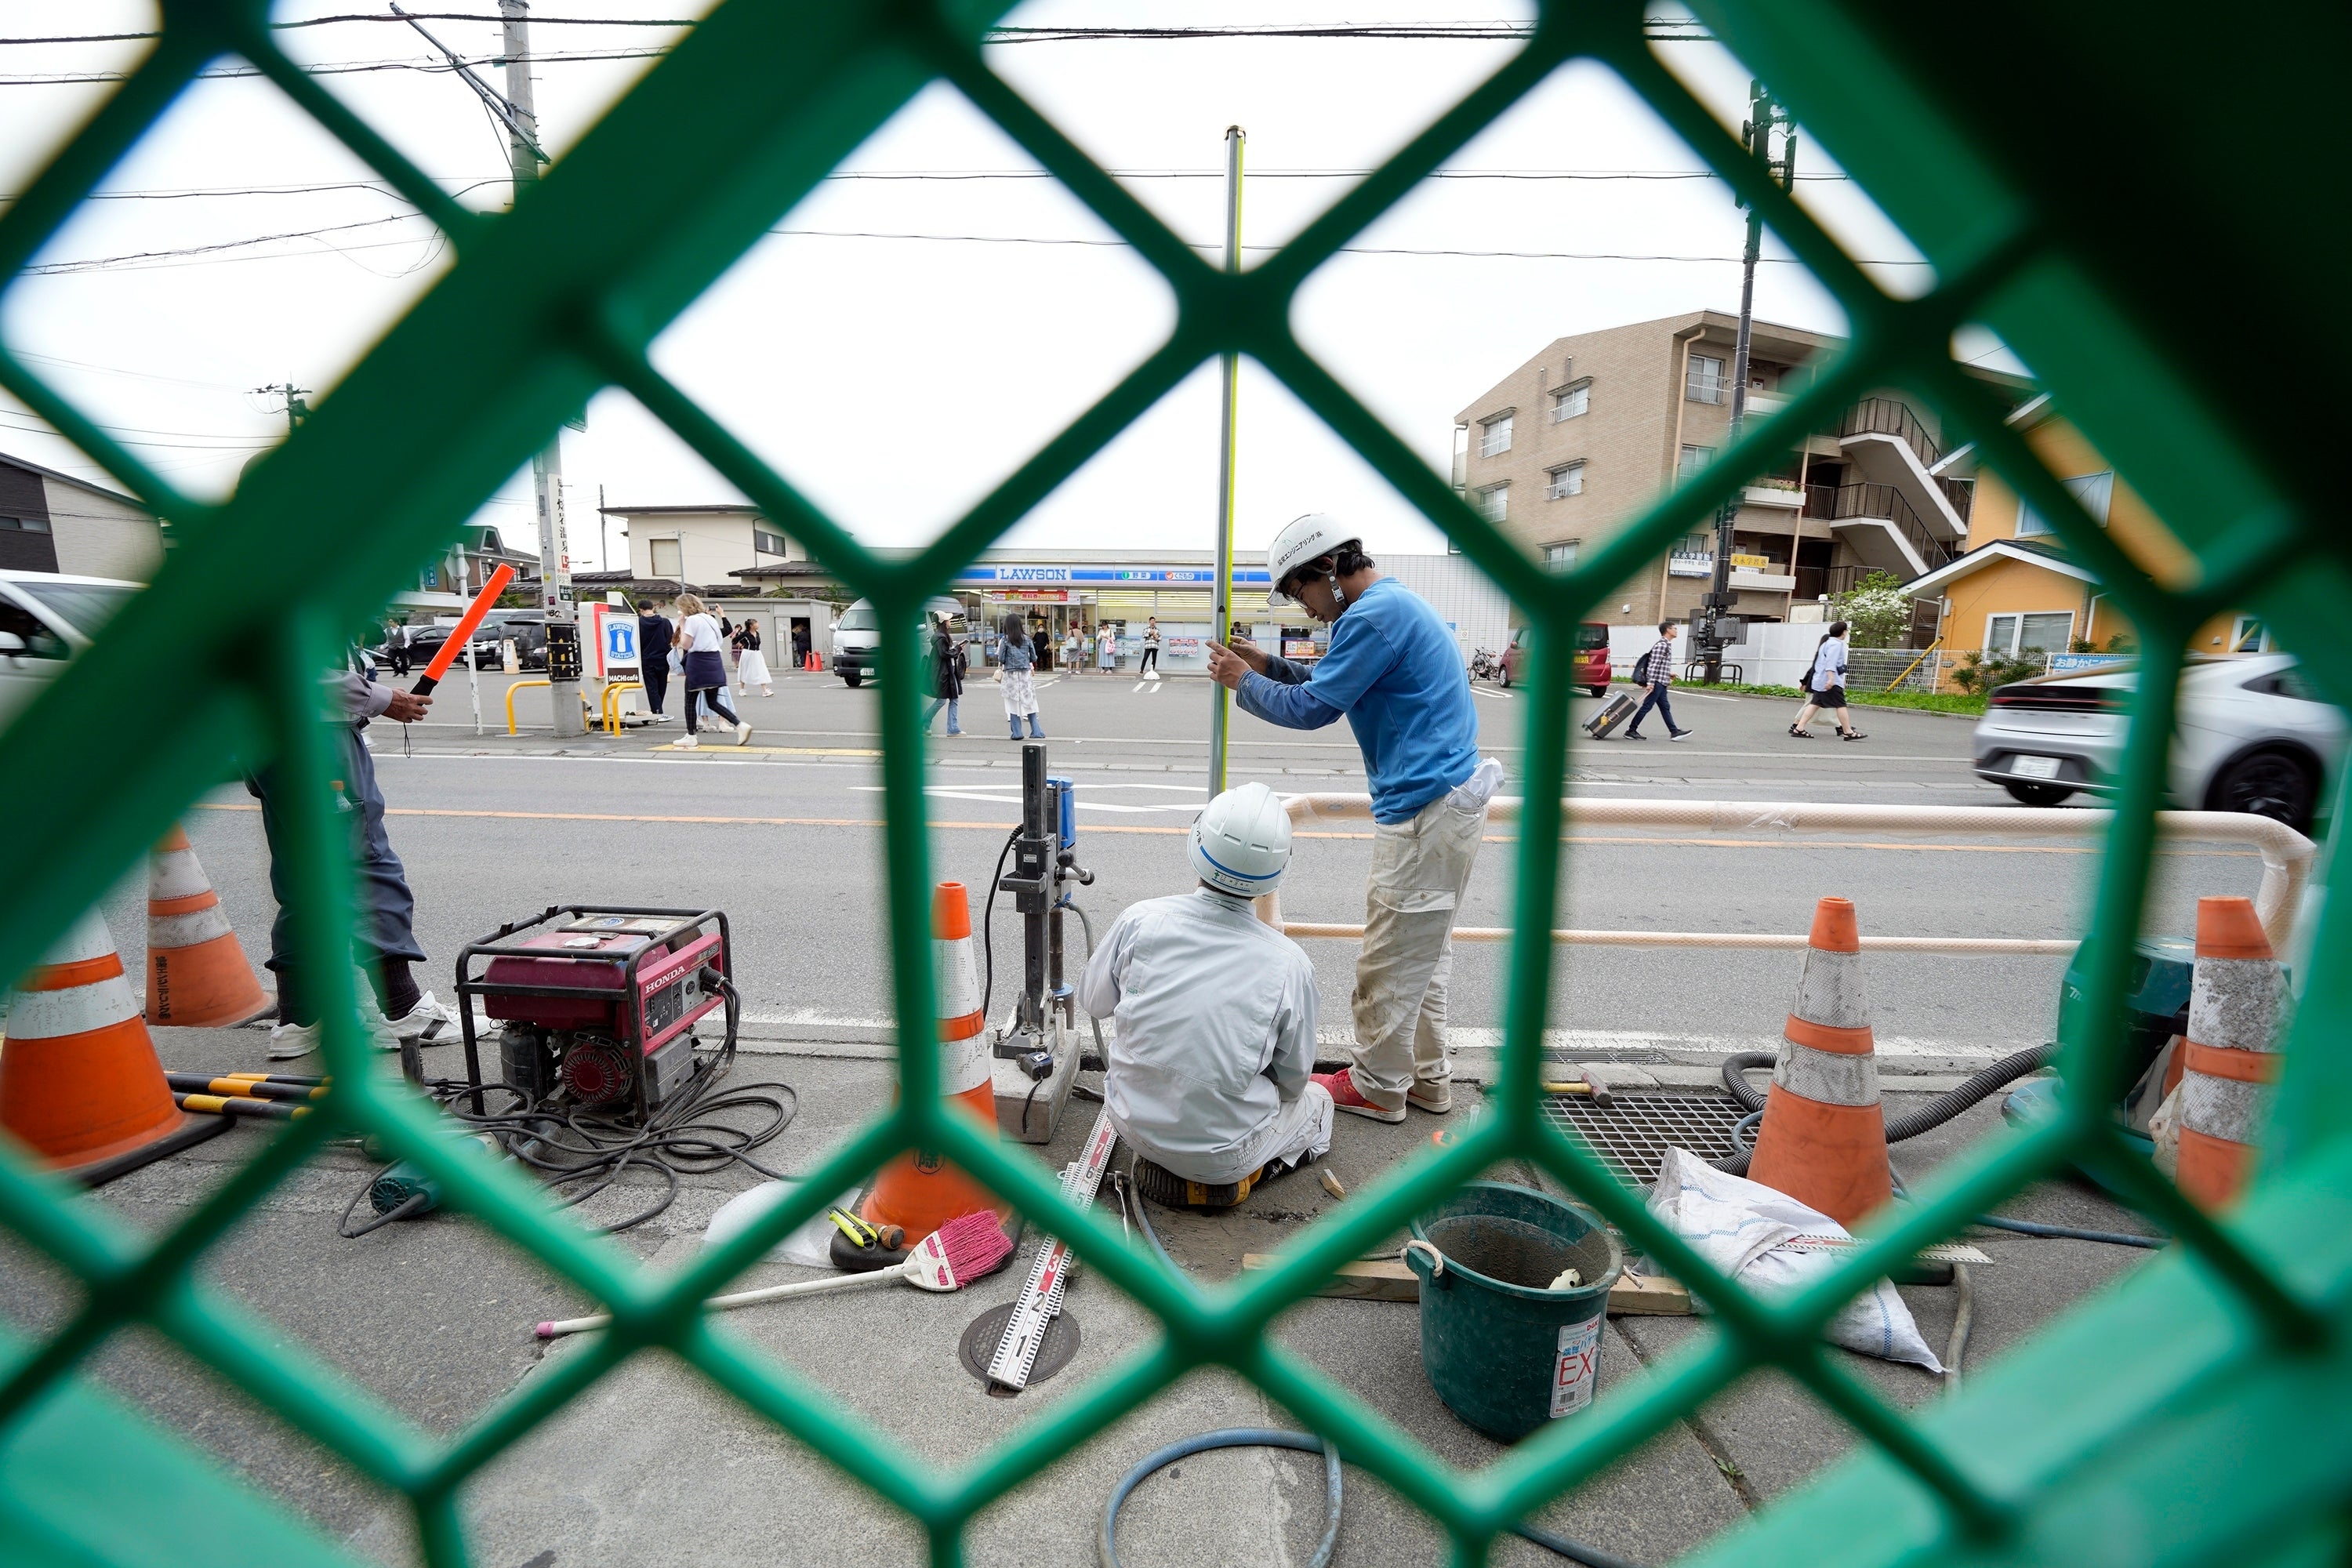 Workers set up a barricade near the Lawson convenience store, background, Tuesday, April 30, 2024, at Fujikawaguchiko